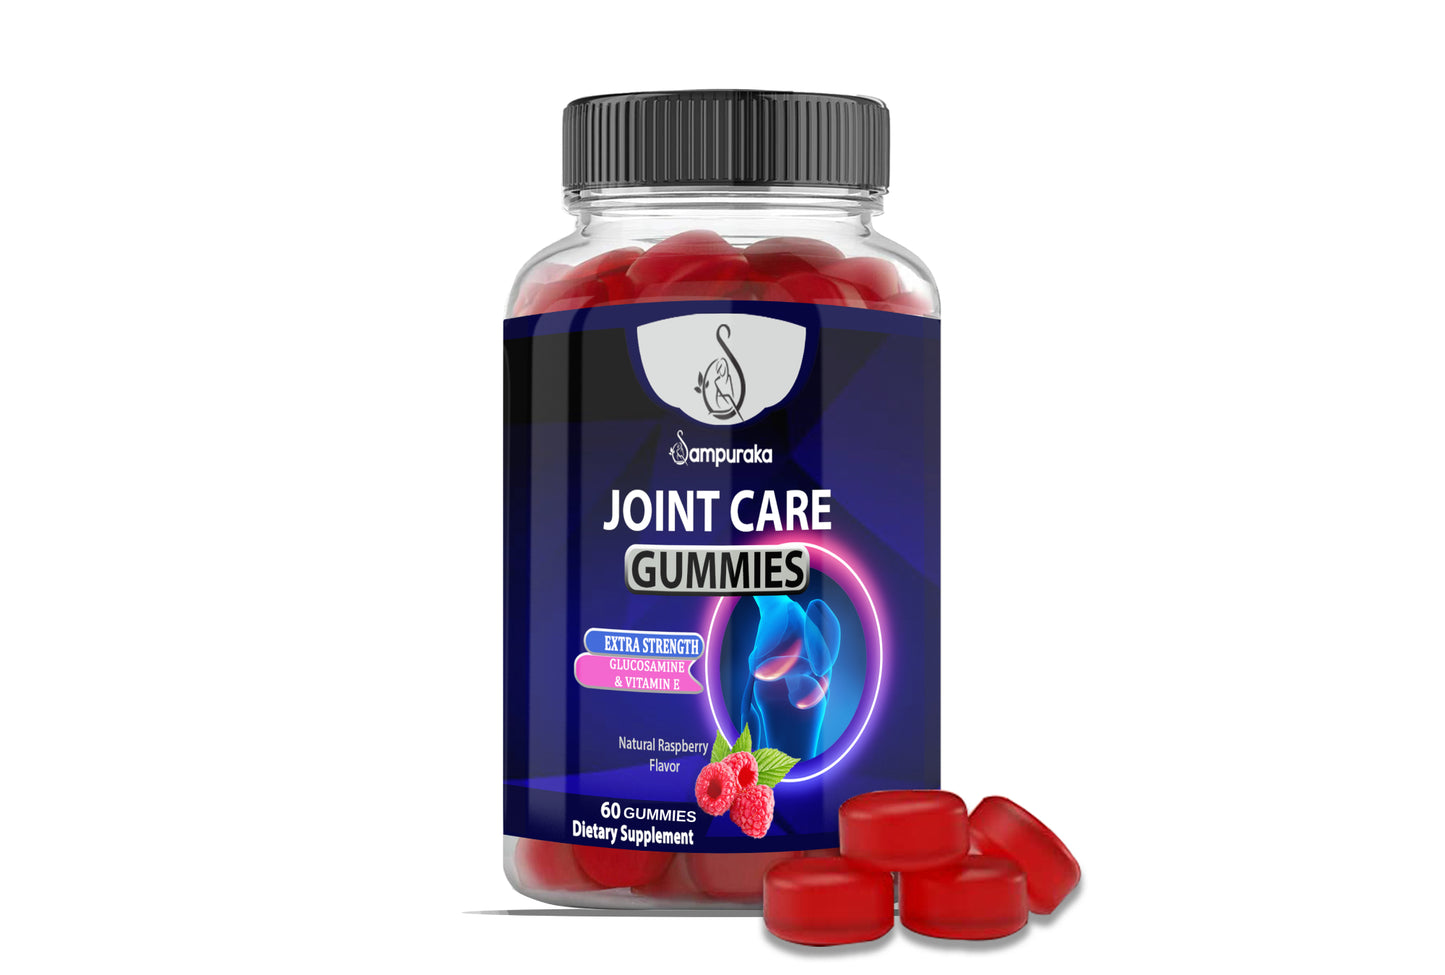 Relieve Joint Pain with Our Joint Care Gummies – sampuraka